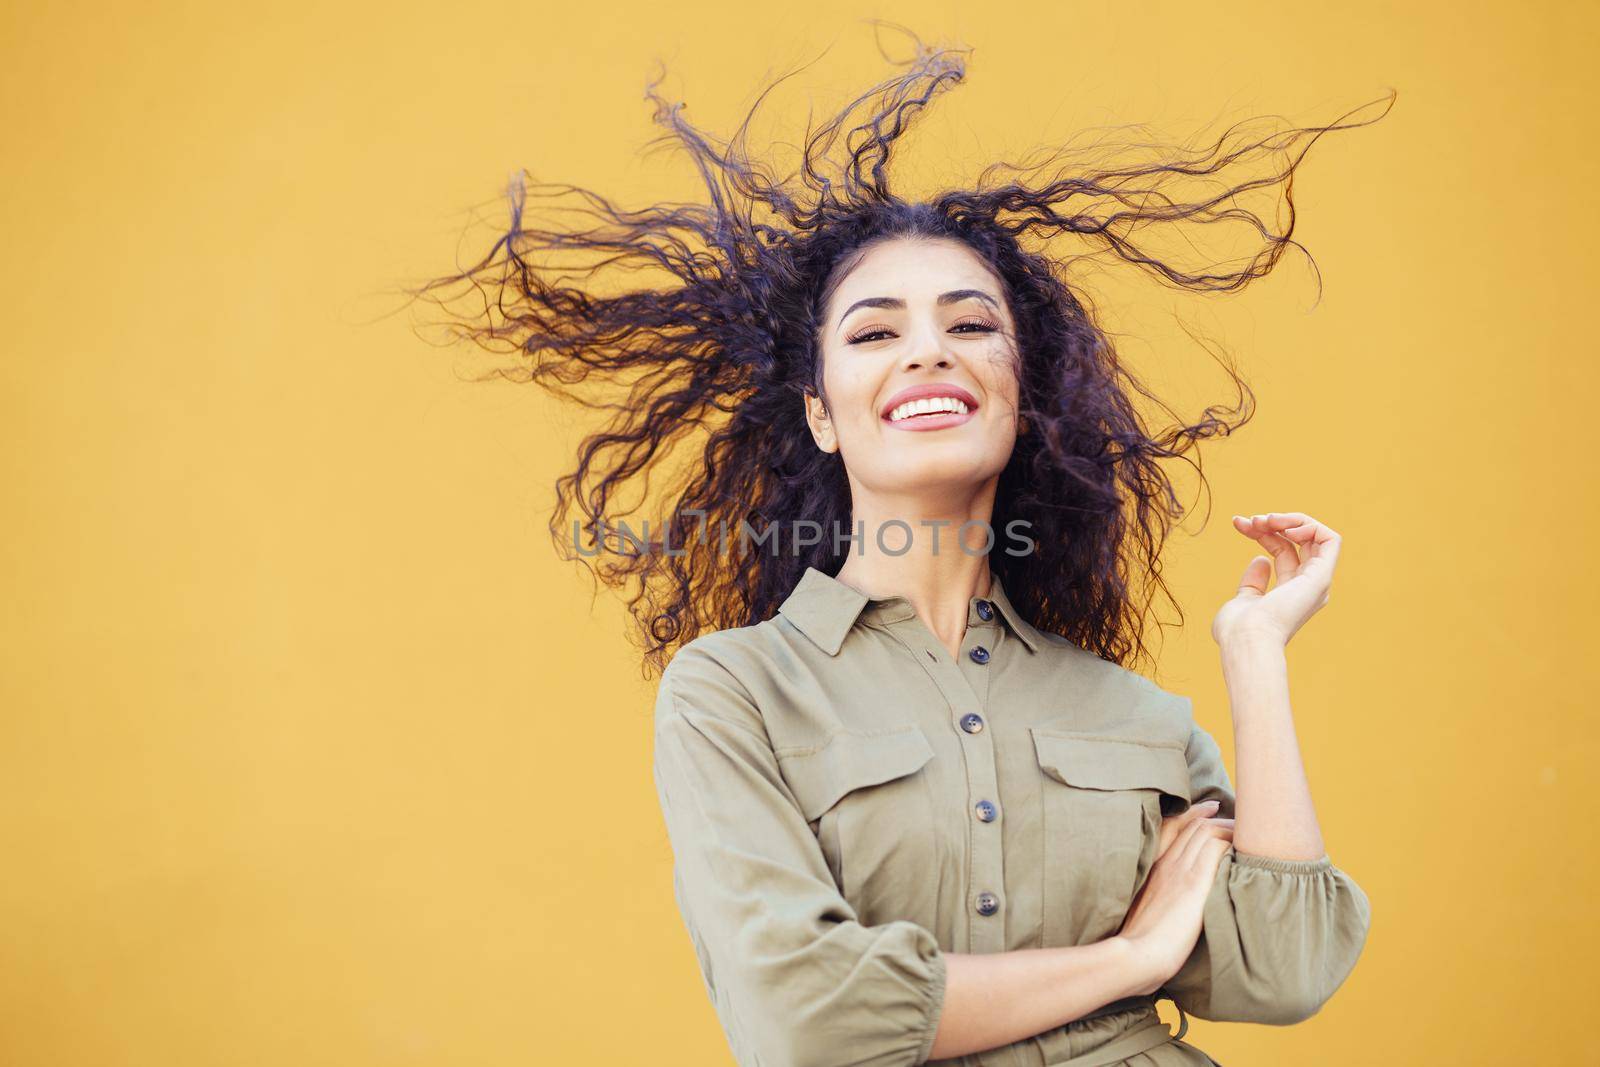 Arab woman with curly hair moved by the wind by javiindy